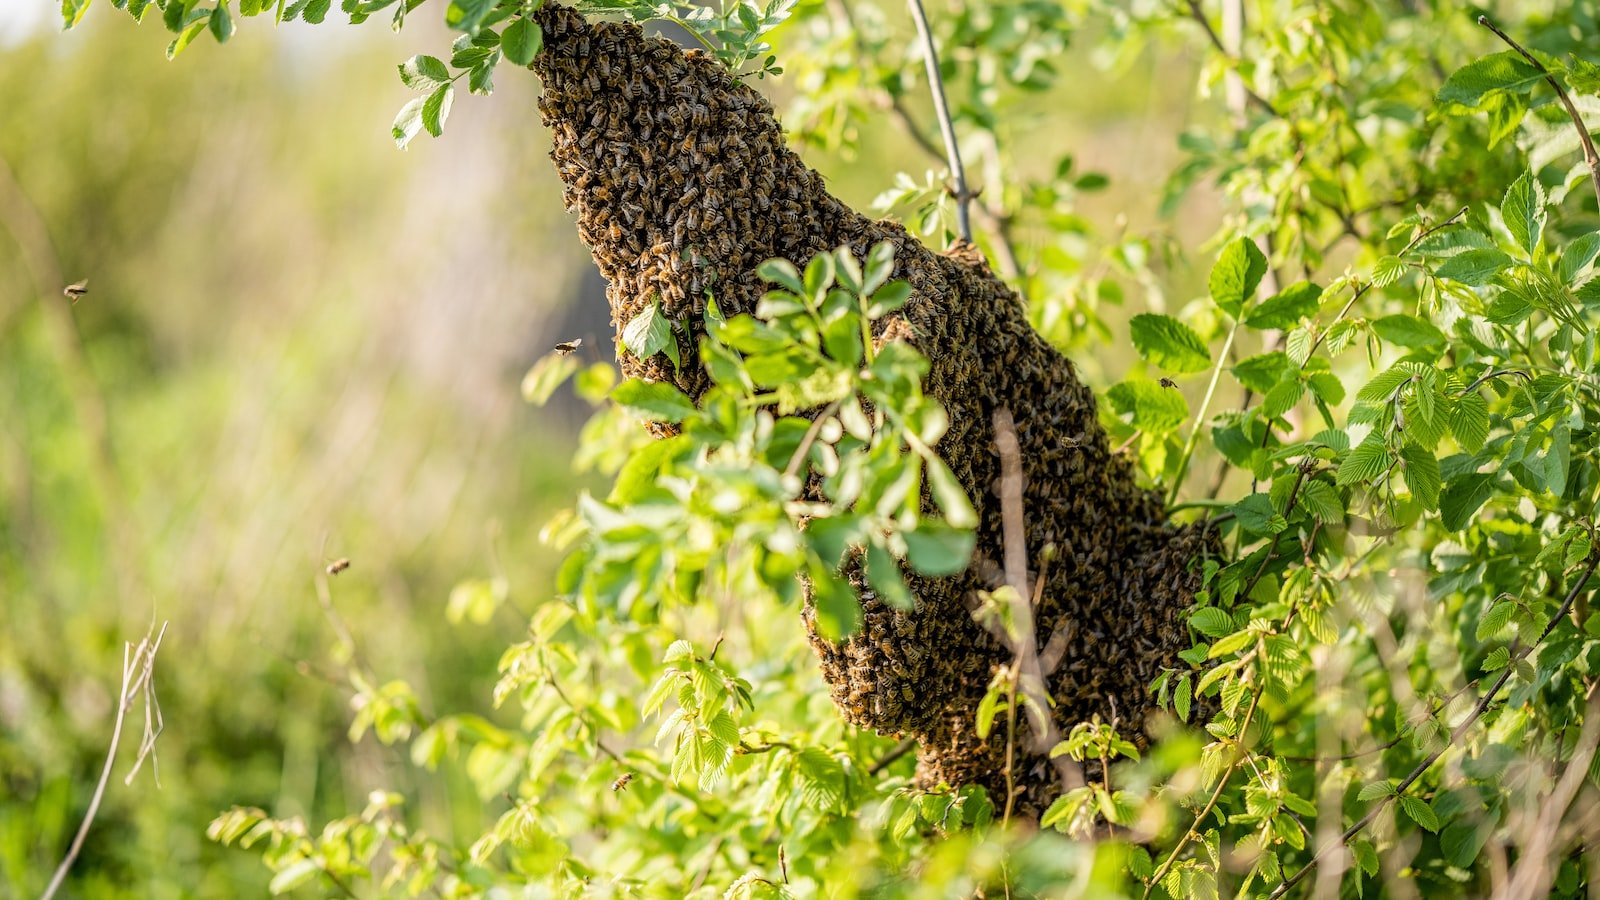 How to Prepare Your Hive for Honey Harvesting Season